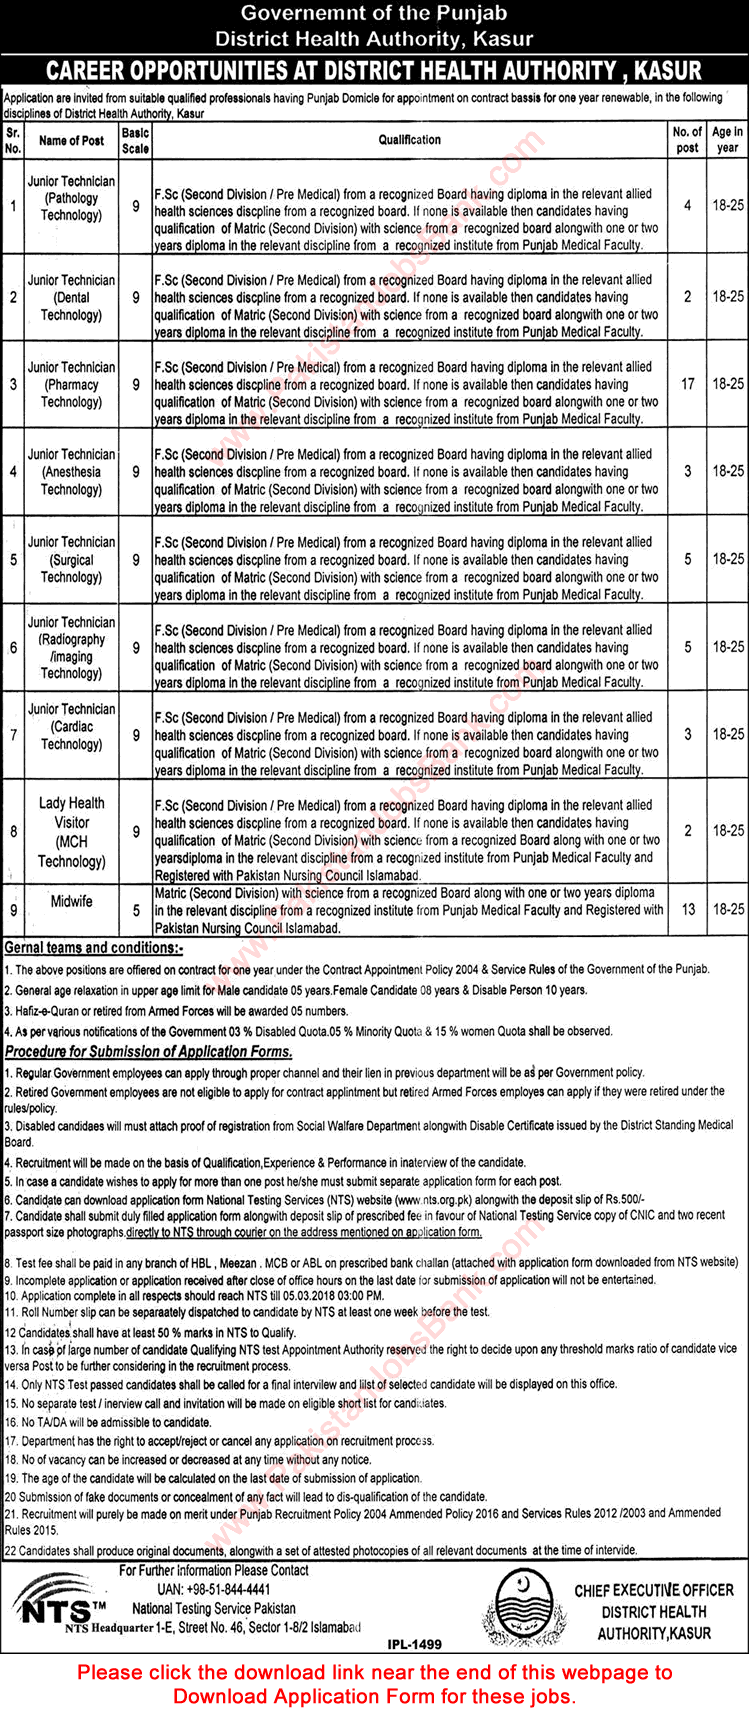 Health Department Kasur Jobs 2018 February NTS Application Form Medical Technicians & Midwives Latest